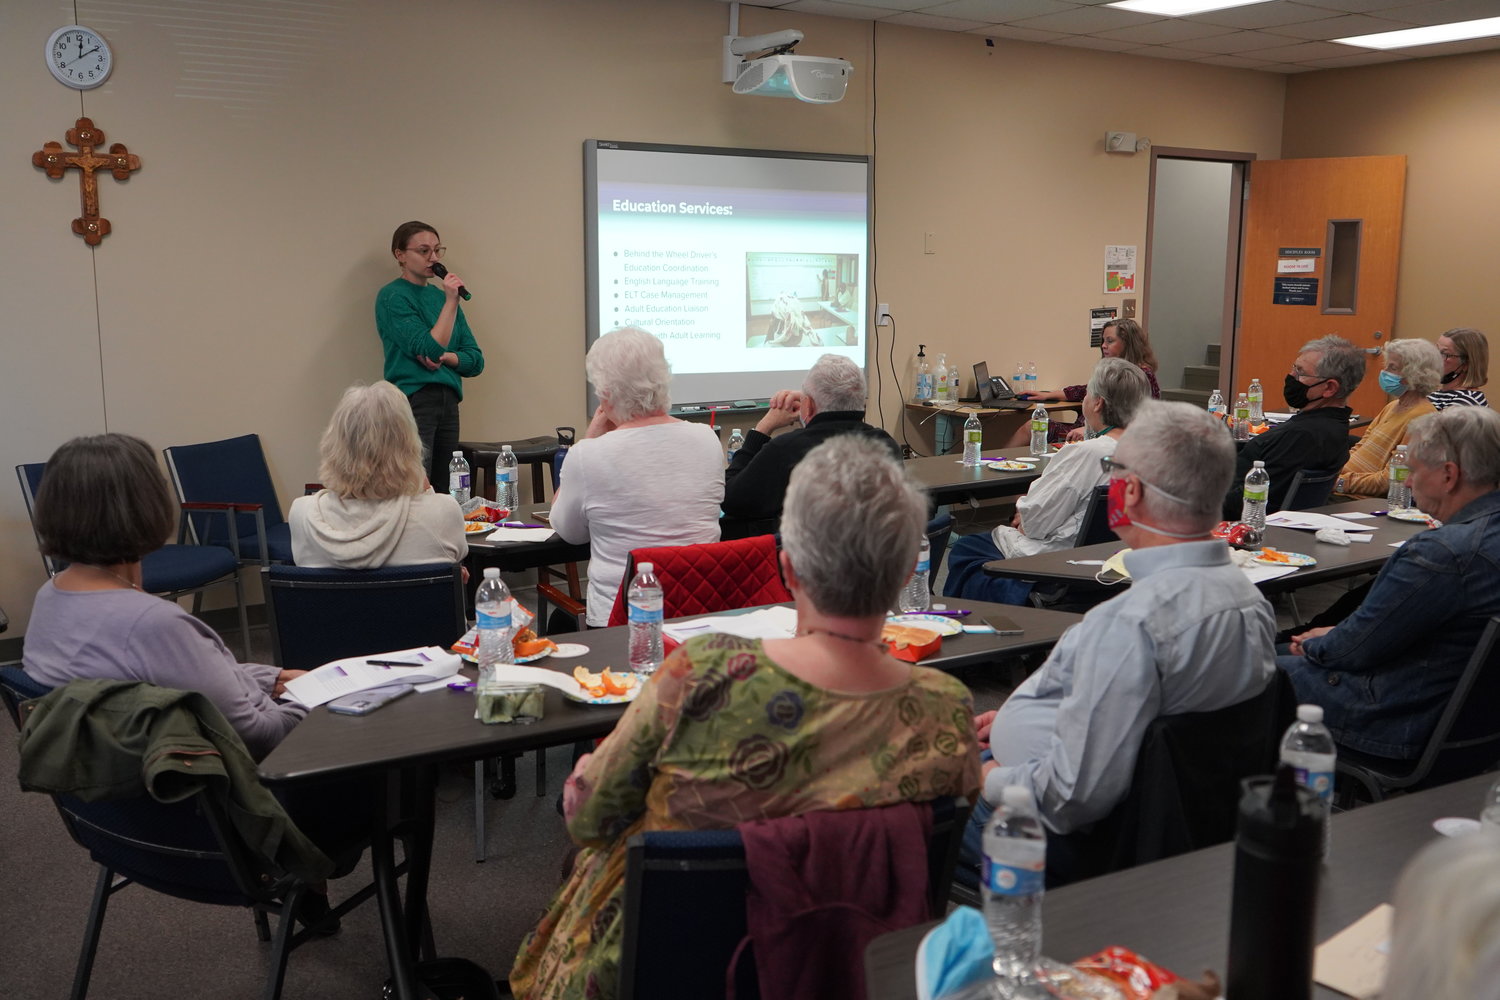 Samantha Moog, director of Refugee Services of Catholic Charities of Central and Northern Missouri, addresses volunteers during an orientation session for community sponsorship of refugees.